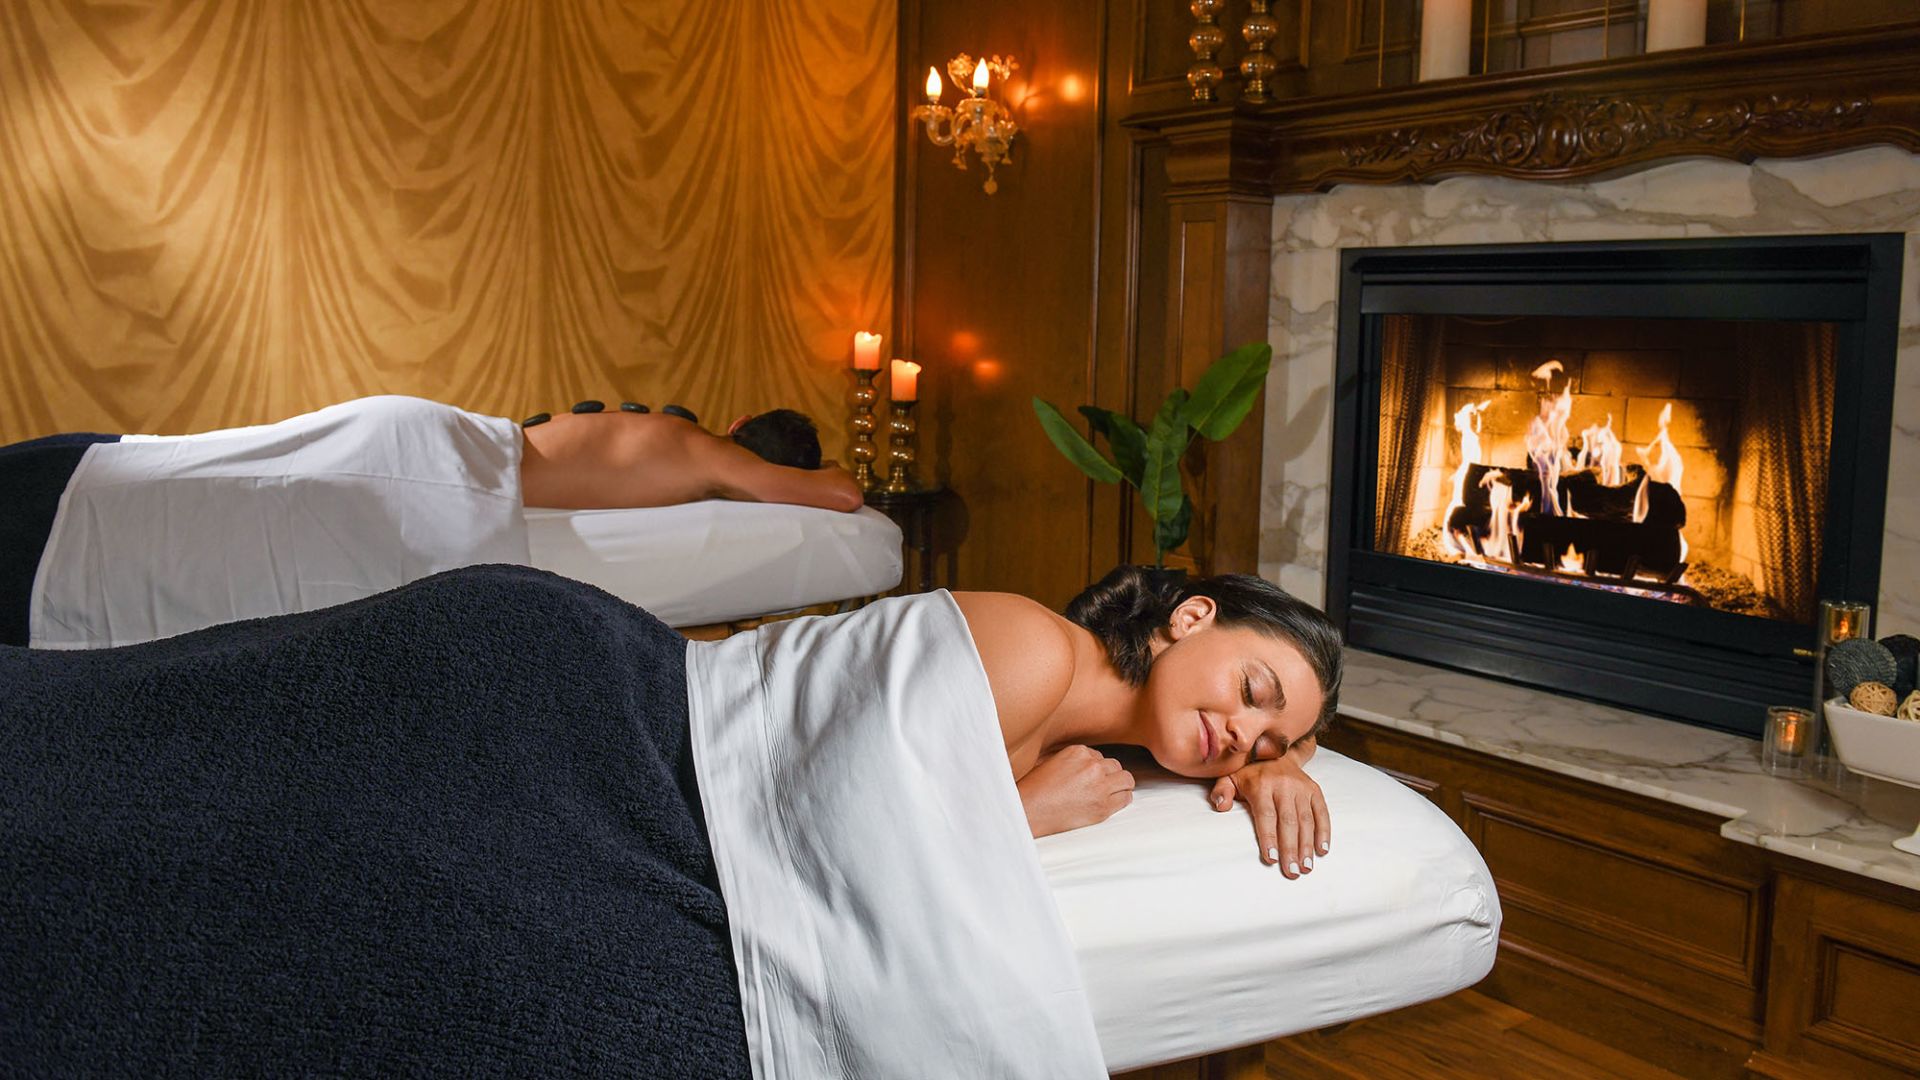 A Person Lying On A Bed In Front Of A Fireplace